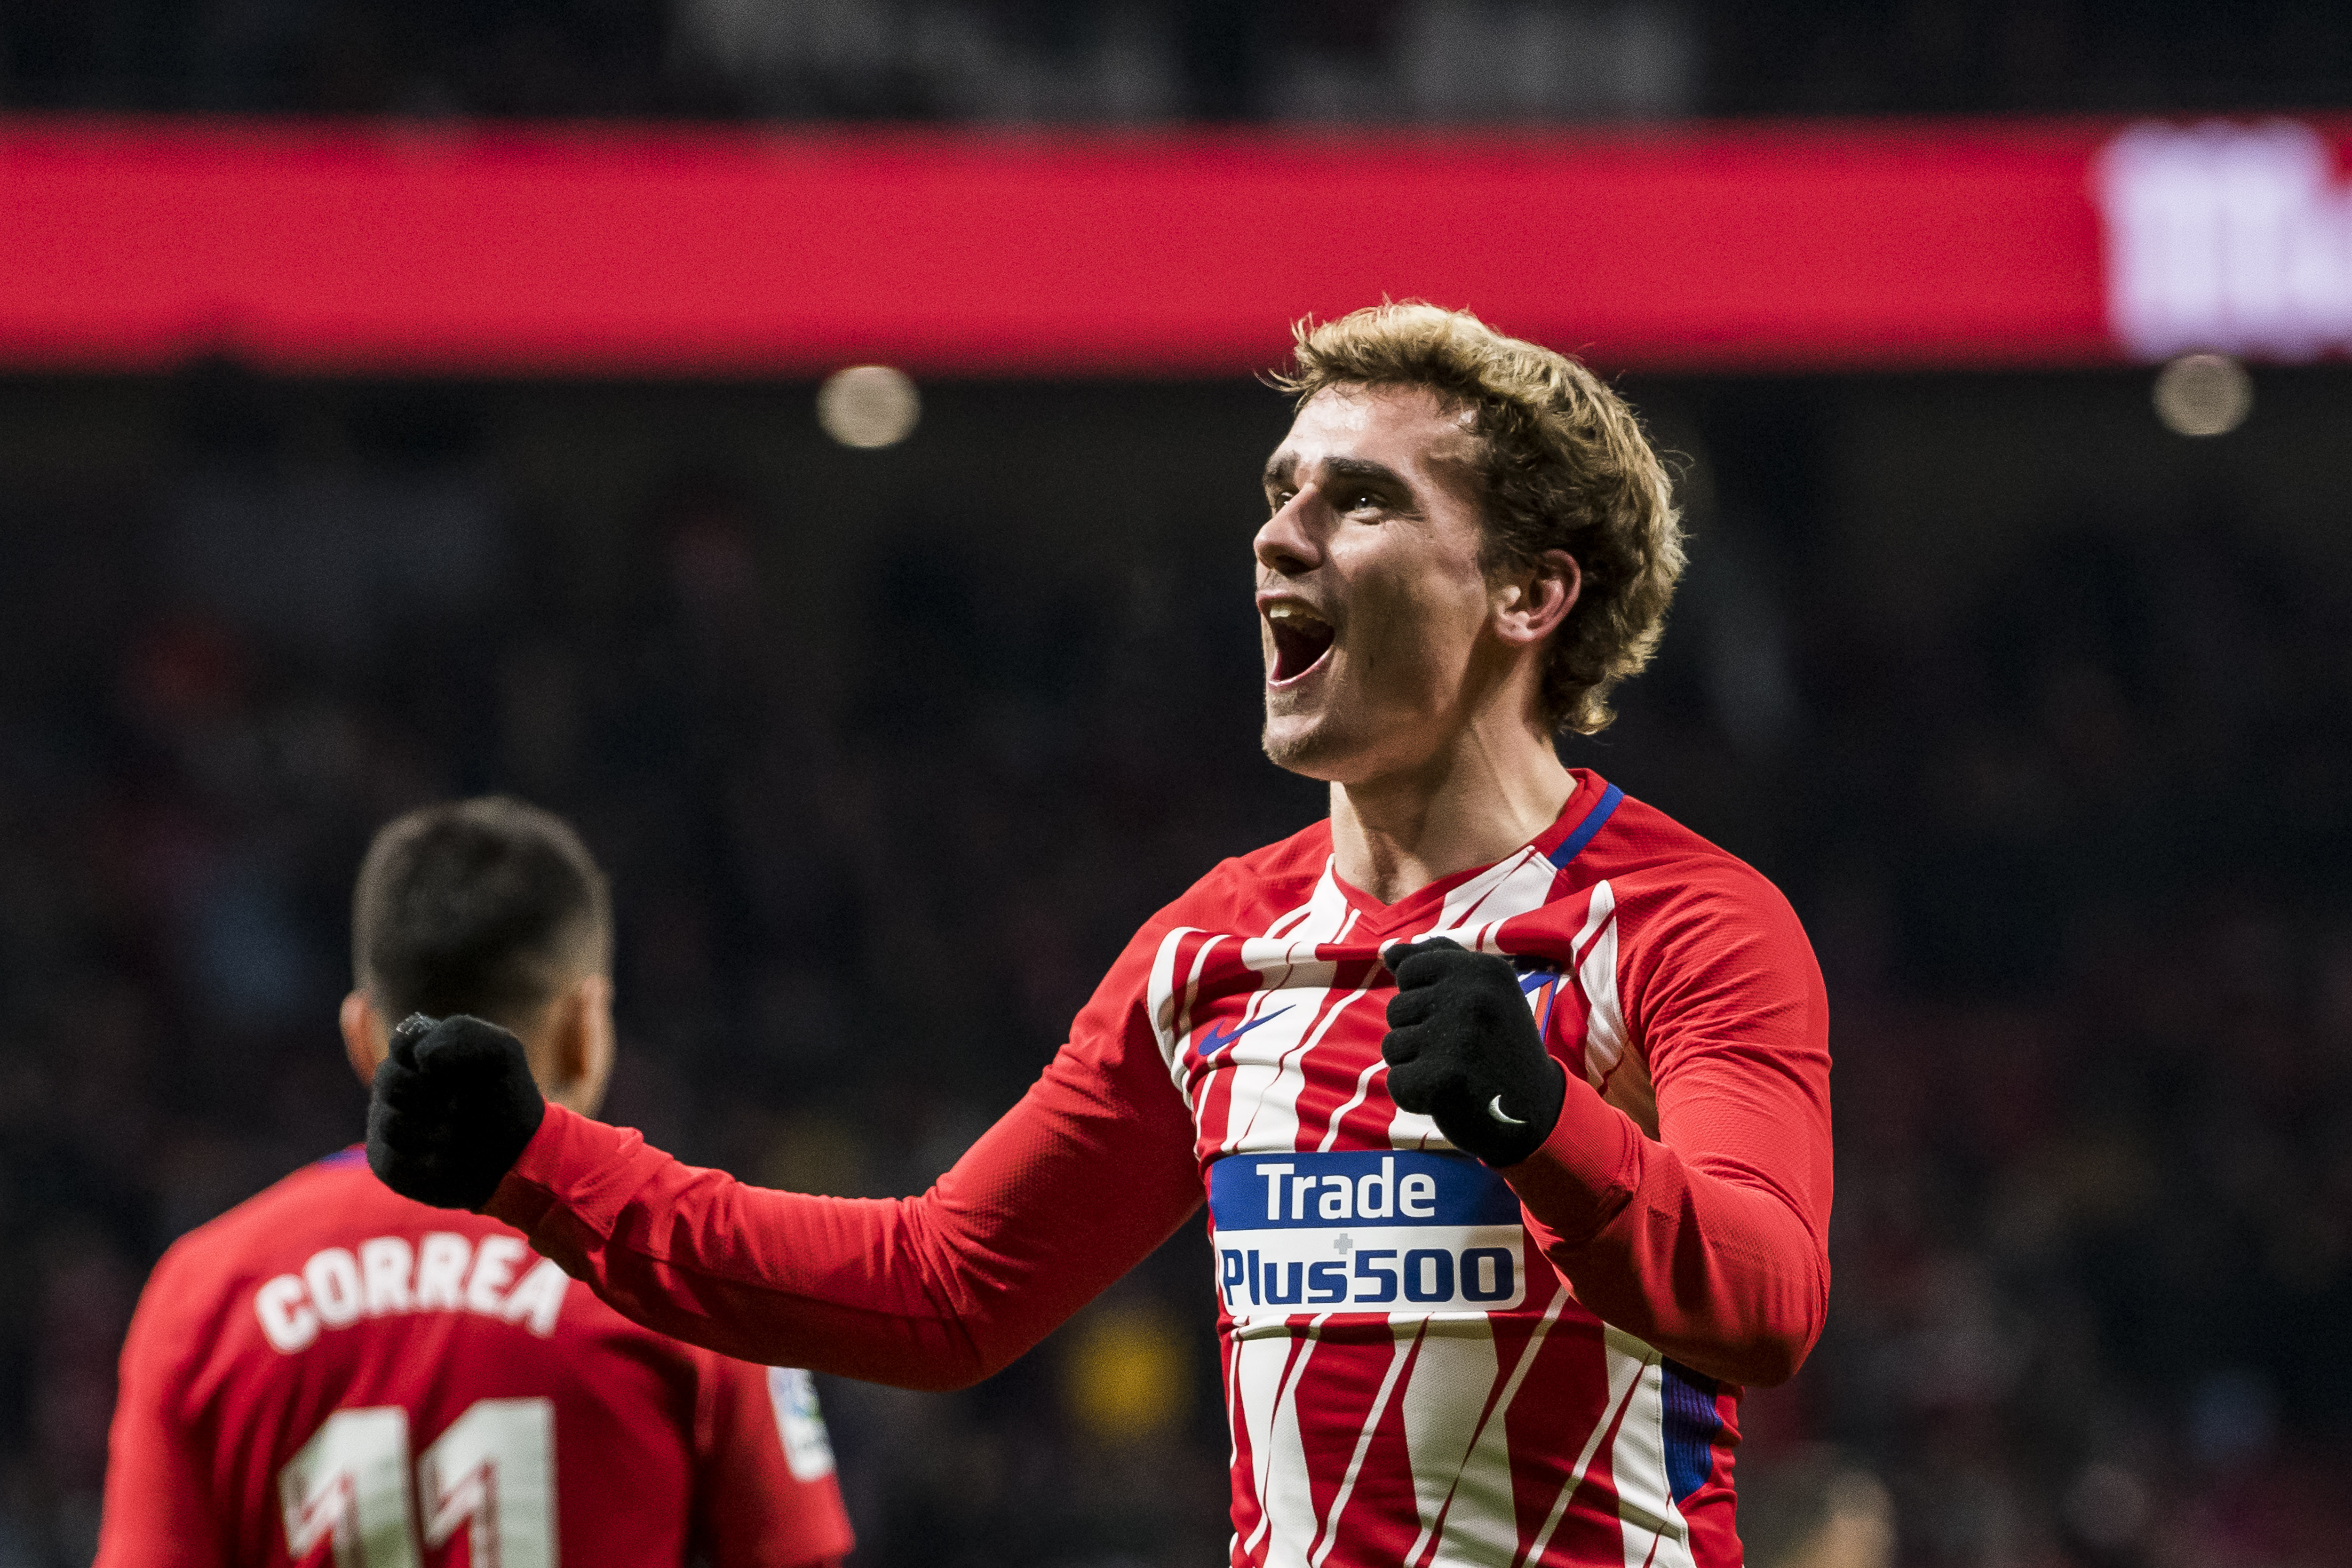 Antoine Griezmann celebrates after scoring for Atletico Madrid against Leganes in February 2018.